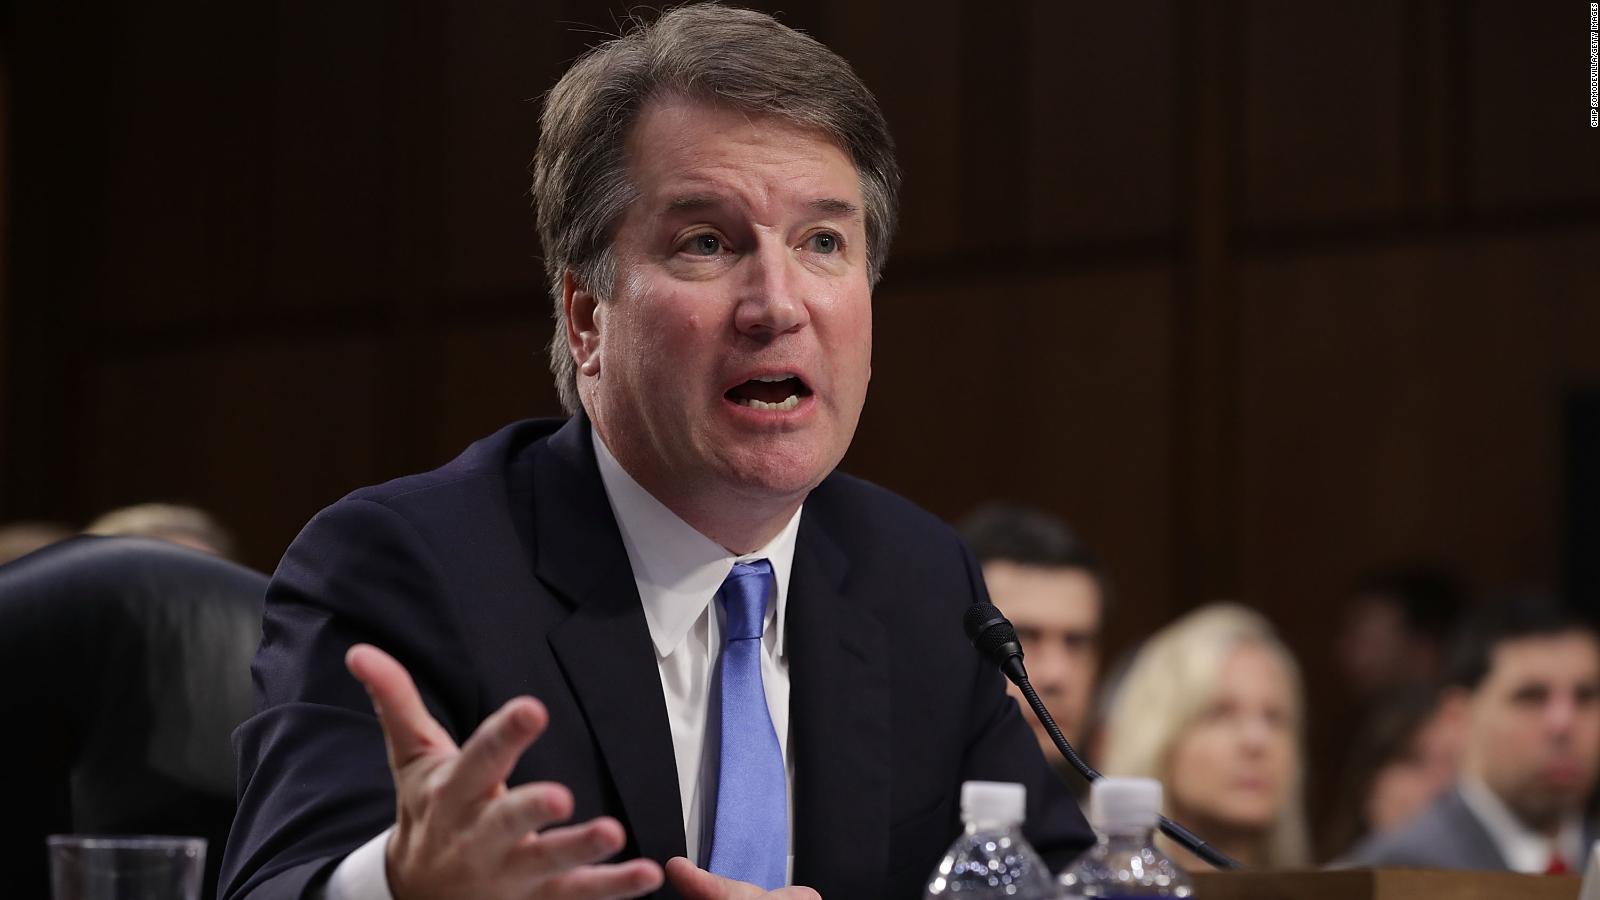 White House And Brett Kavanaugh Deny Allegation Made By Second Woman Cnnpolitics 9599